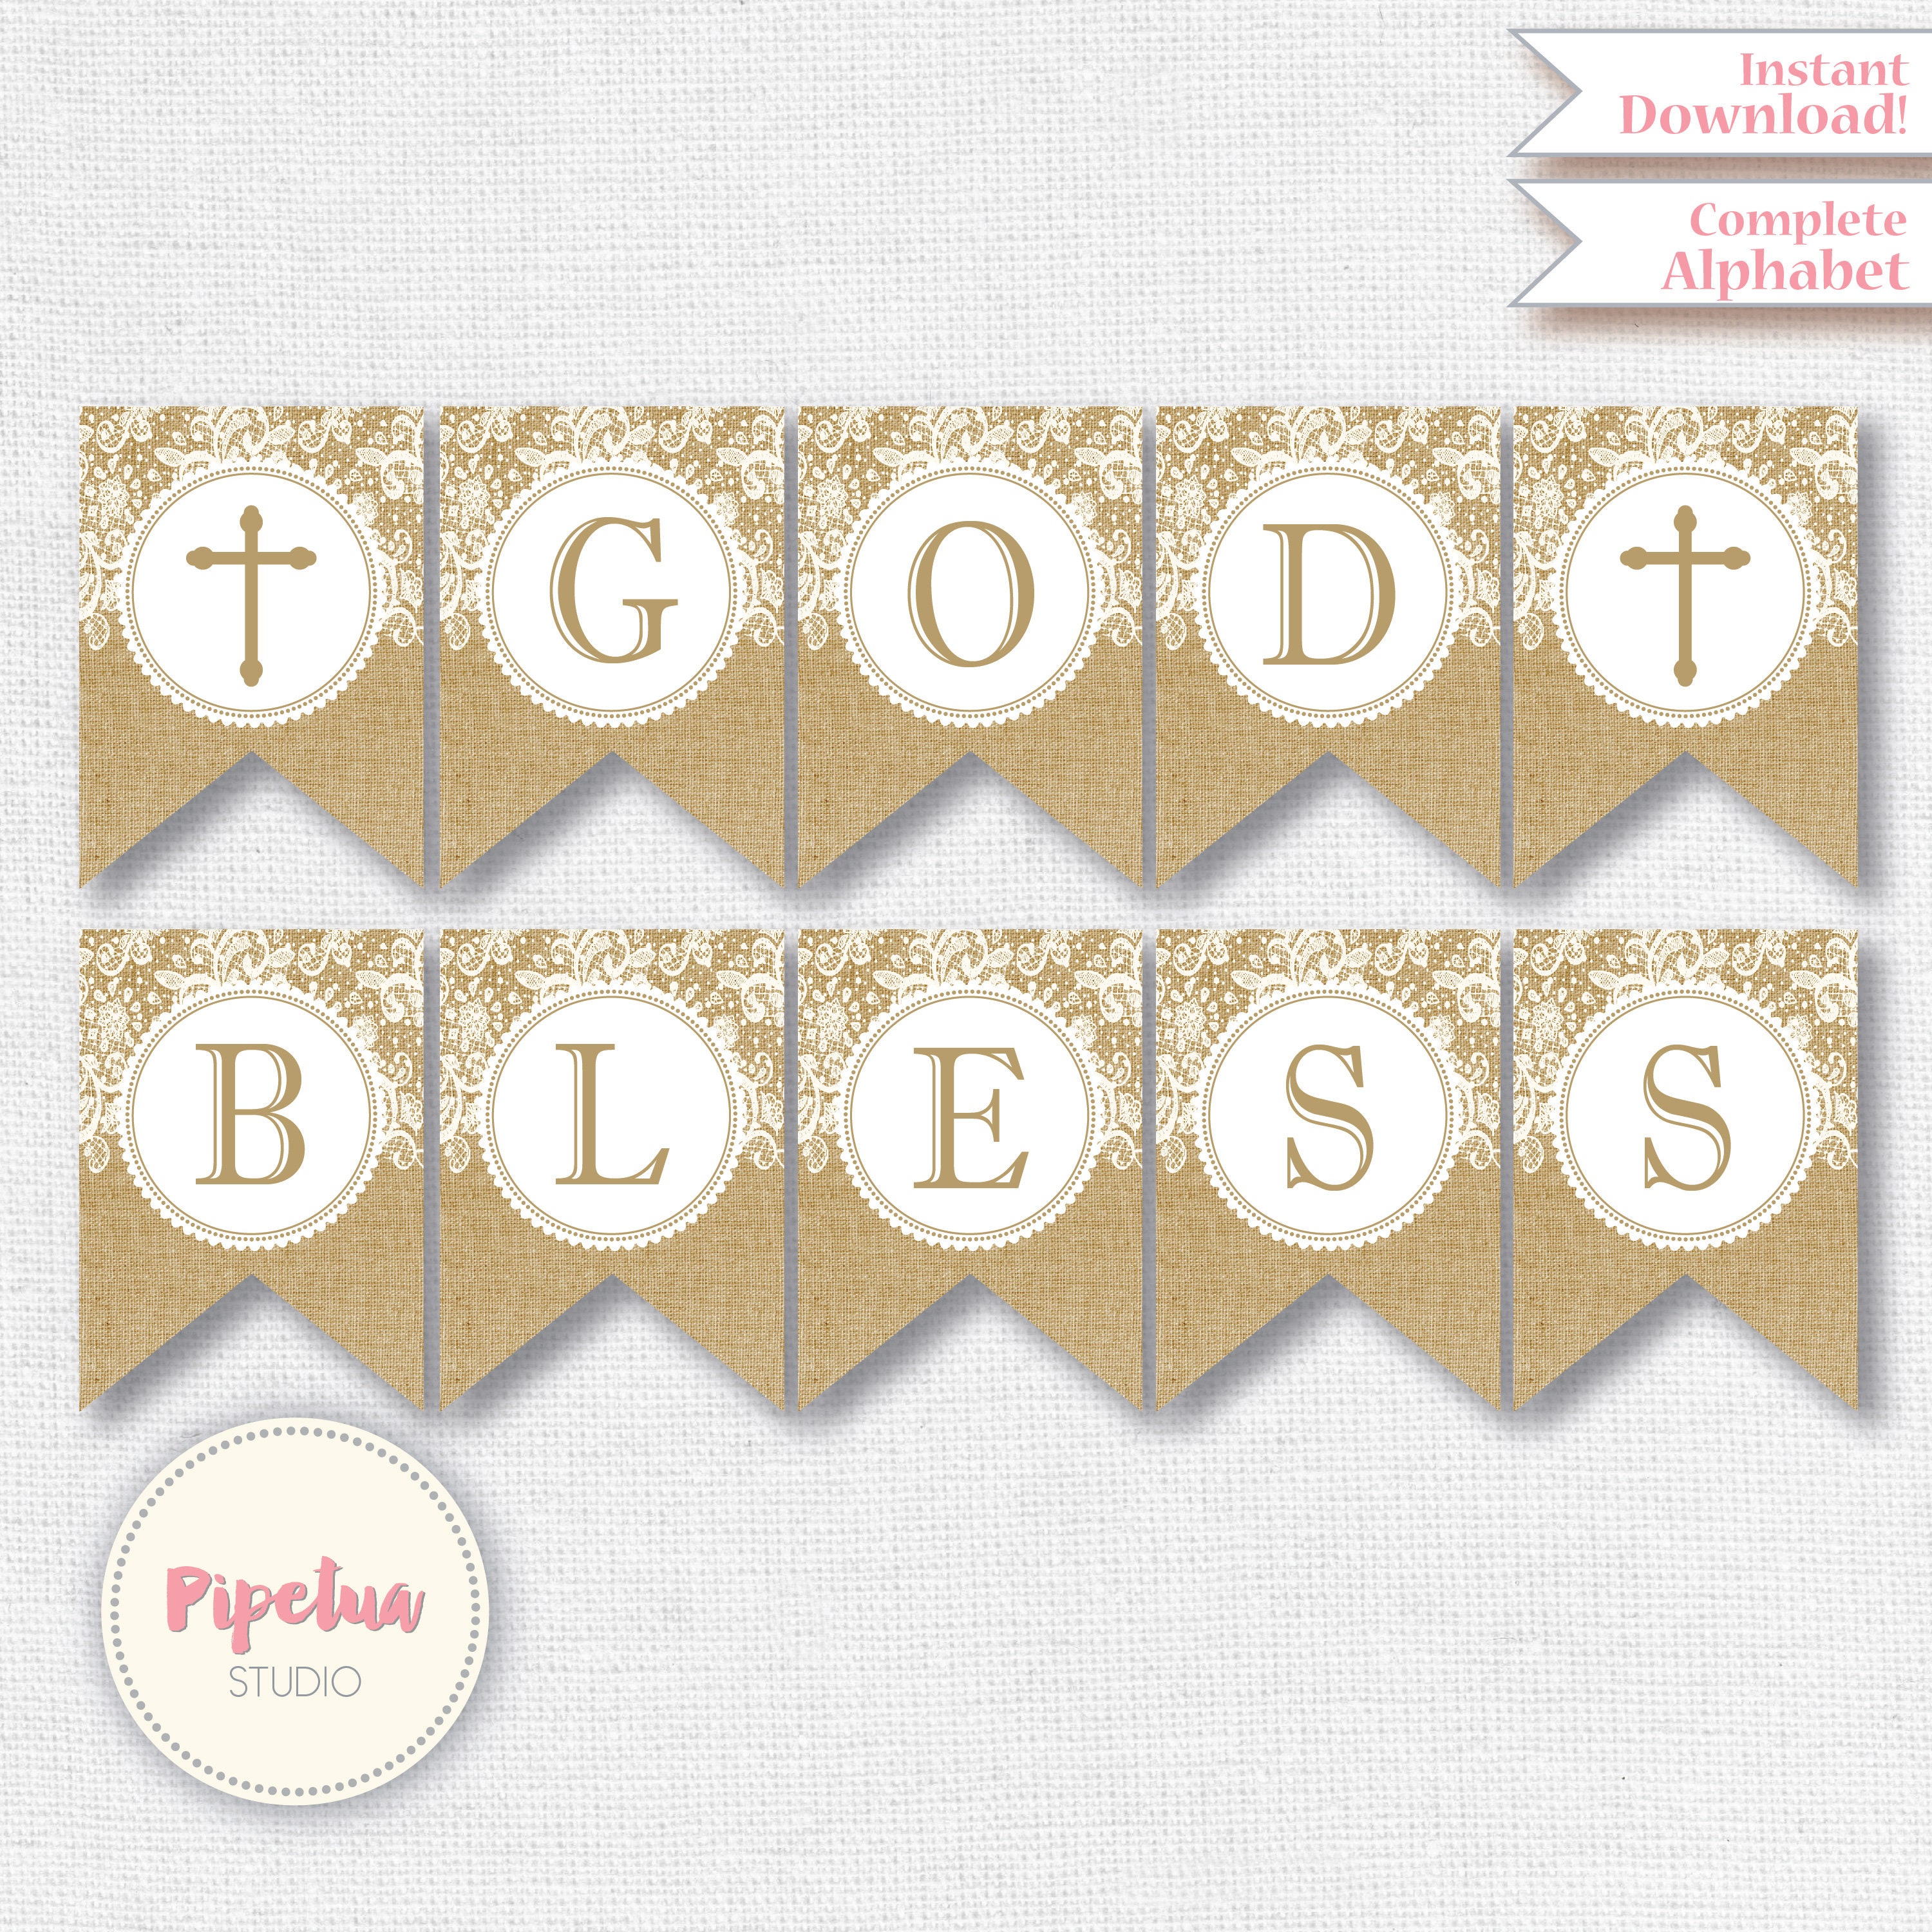 God Bless Baptism Banner by WATINC Communion Party Banner Baby Shower Party First Communion Blue Christening Decoration Kit for Wedding